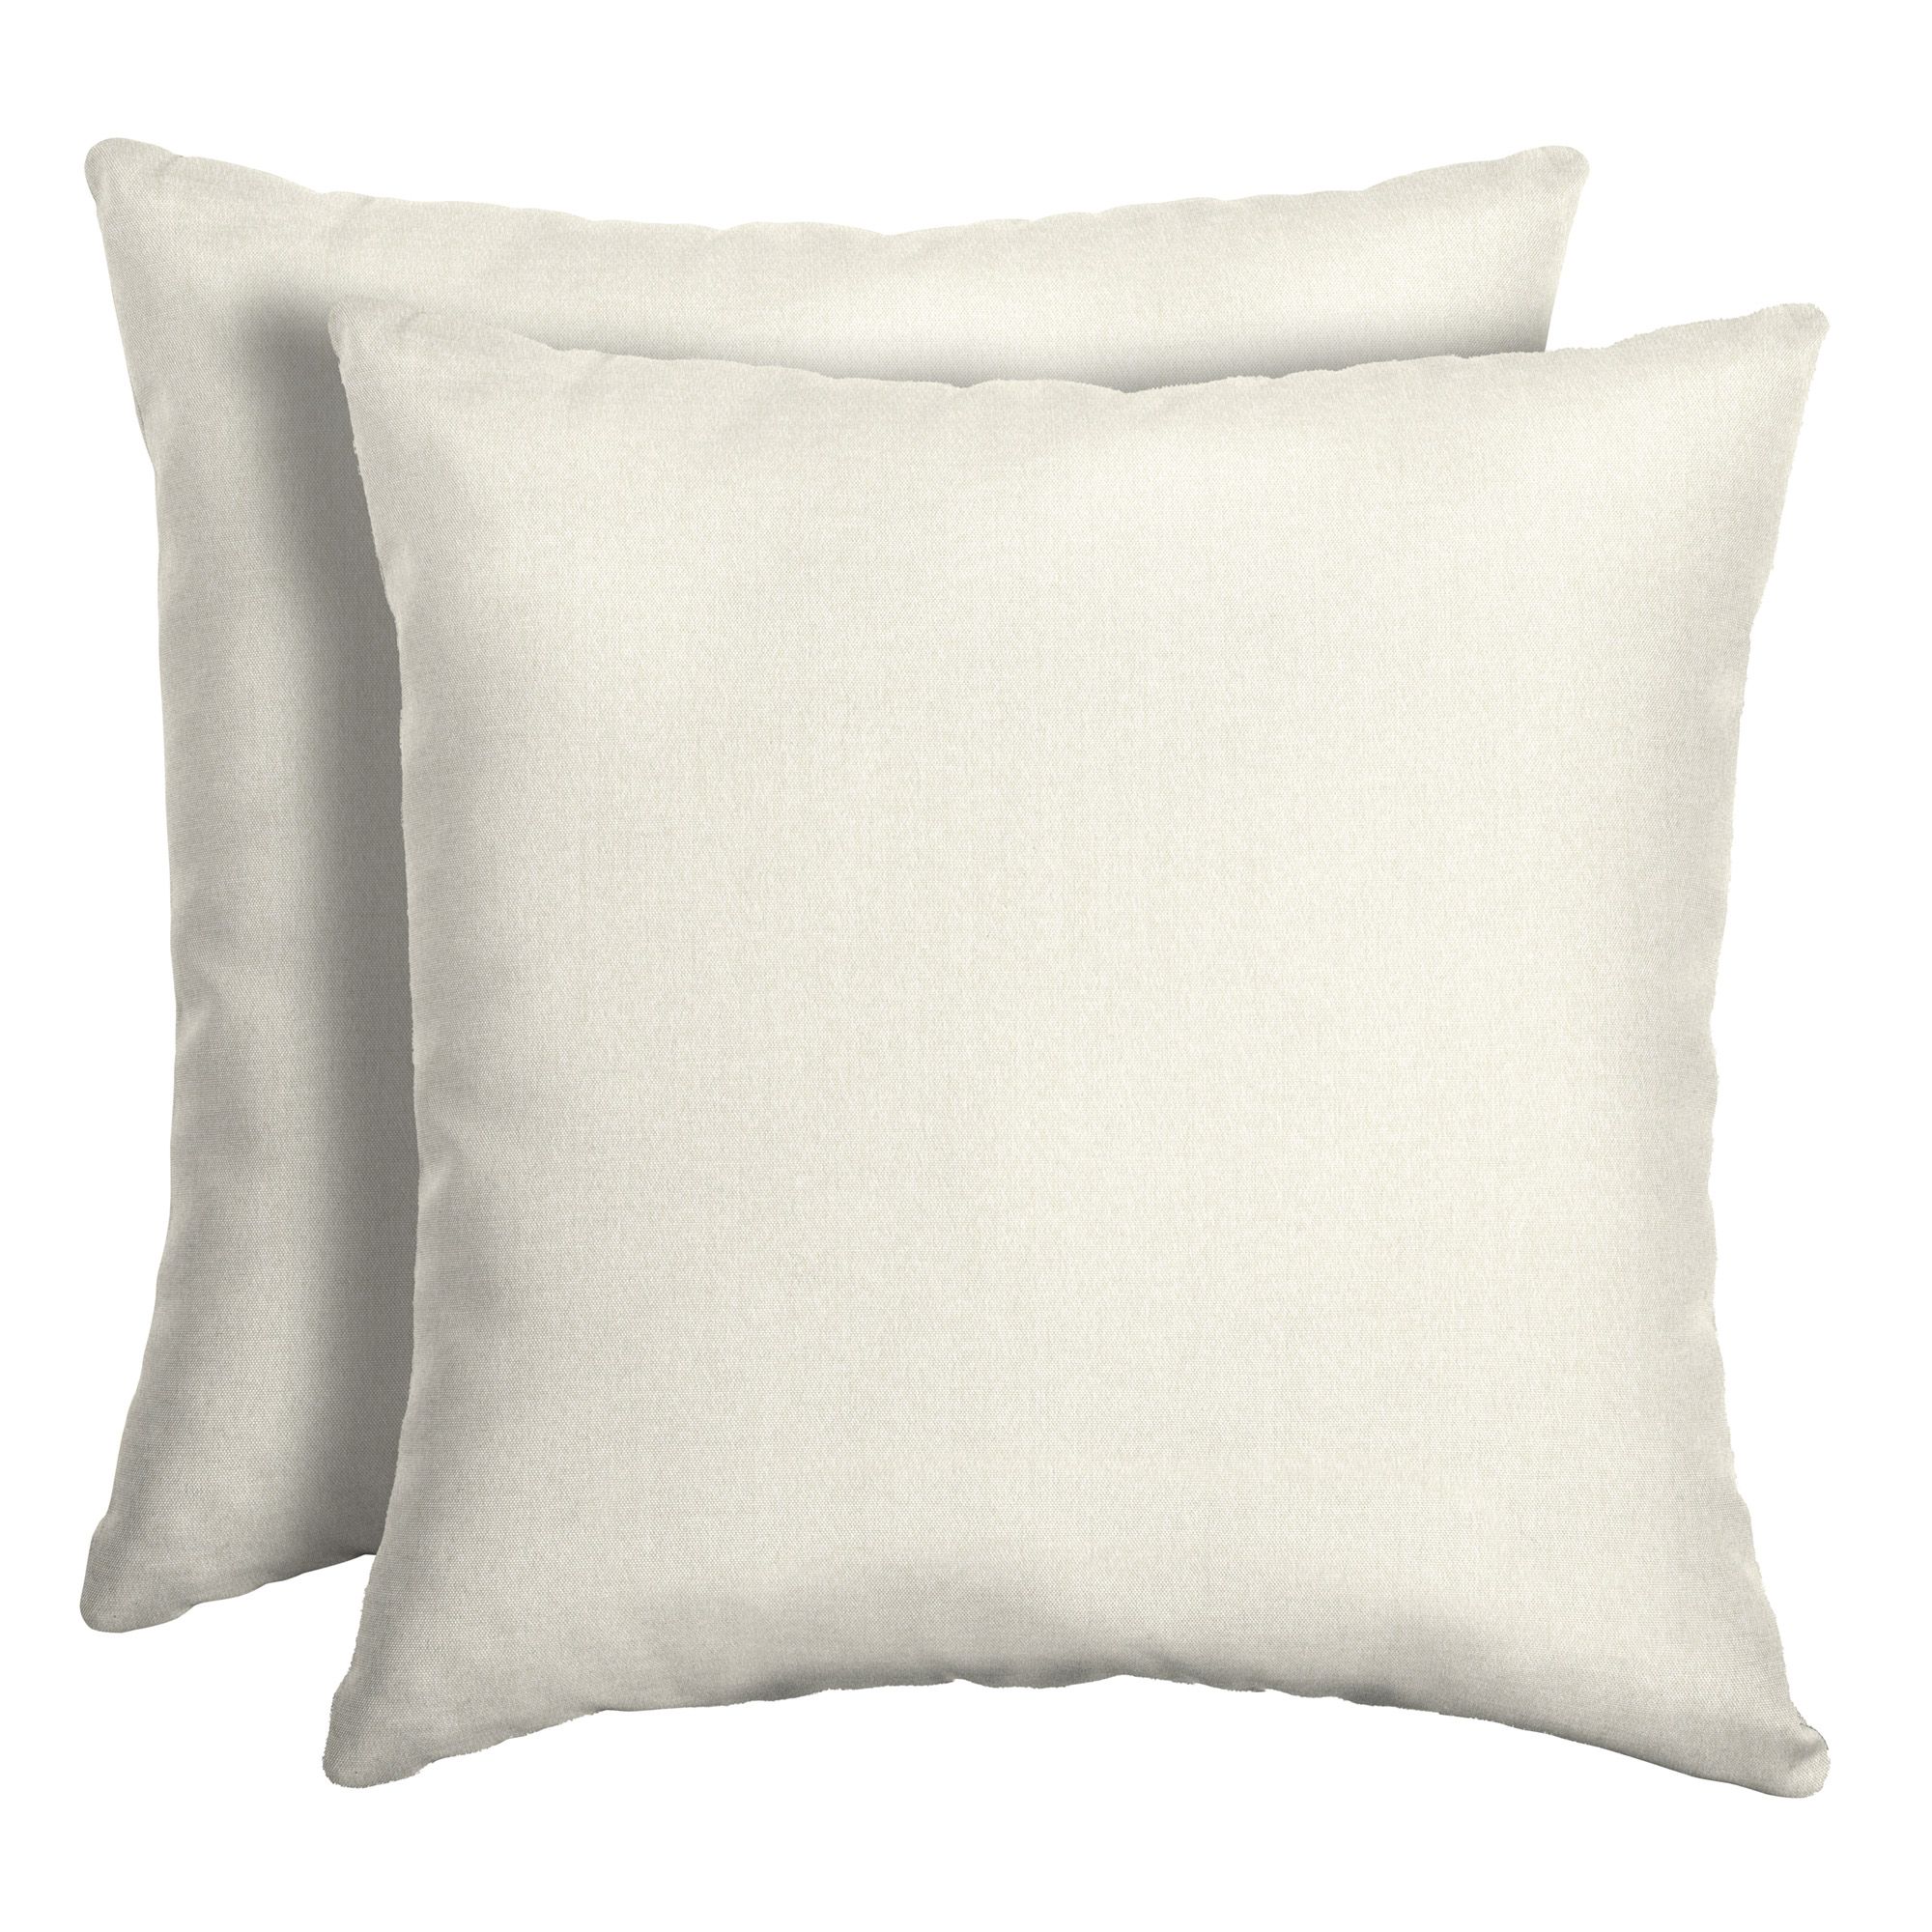 Arden Selections Sand Canvas 16 x 16 in. Outdoor Toss Pillow, Set of 2 | Walmart (US)